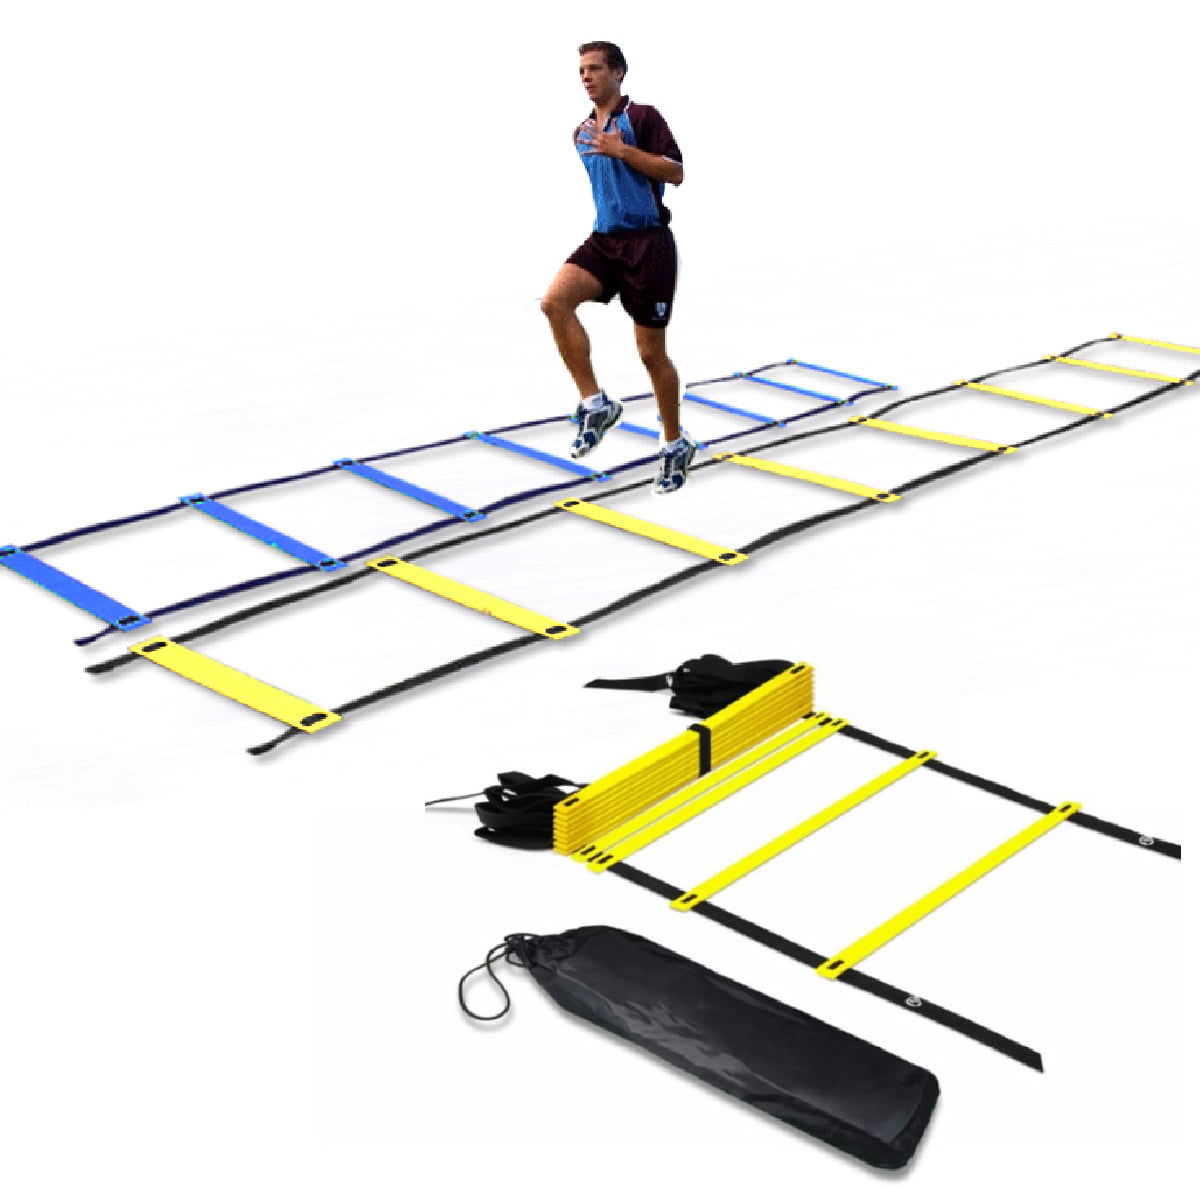 1 Storage Bag VGEBY1 Agility Ladder Speed Agility Training Ladder Include 12 Adjustable Flat Rungs 1 Carrying Handle 10 Cones 